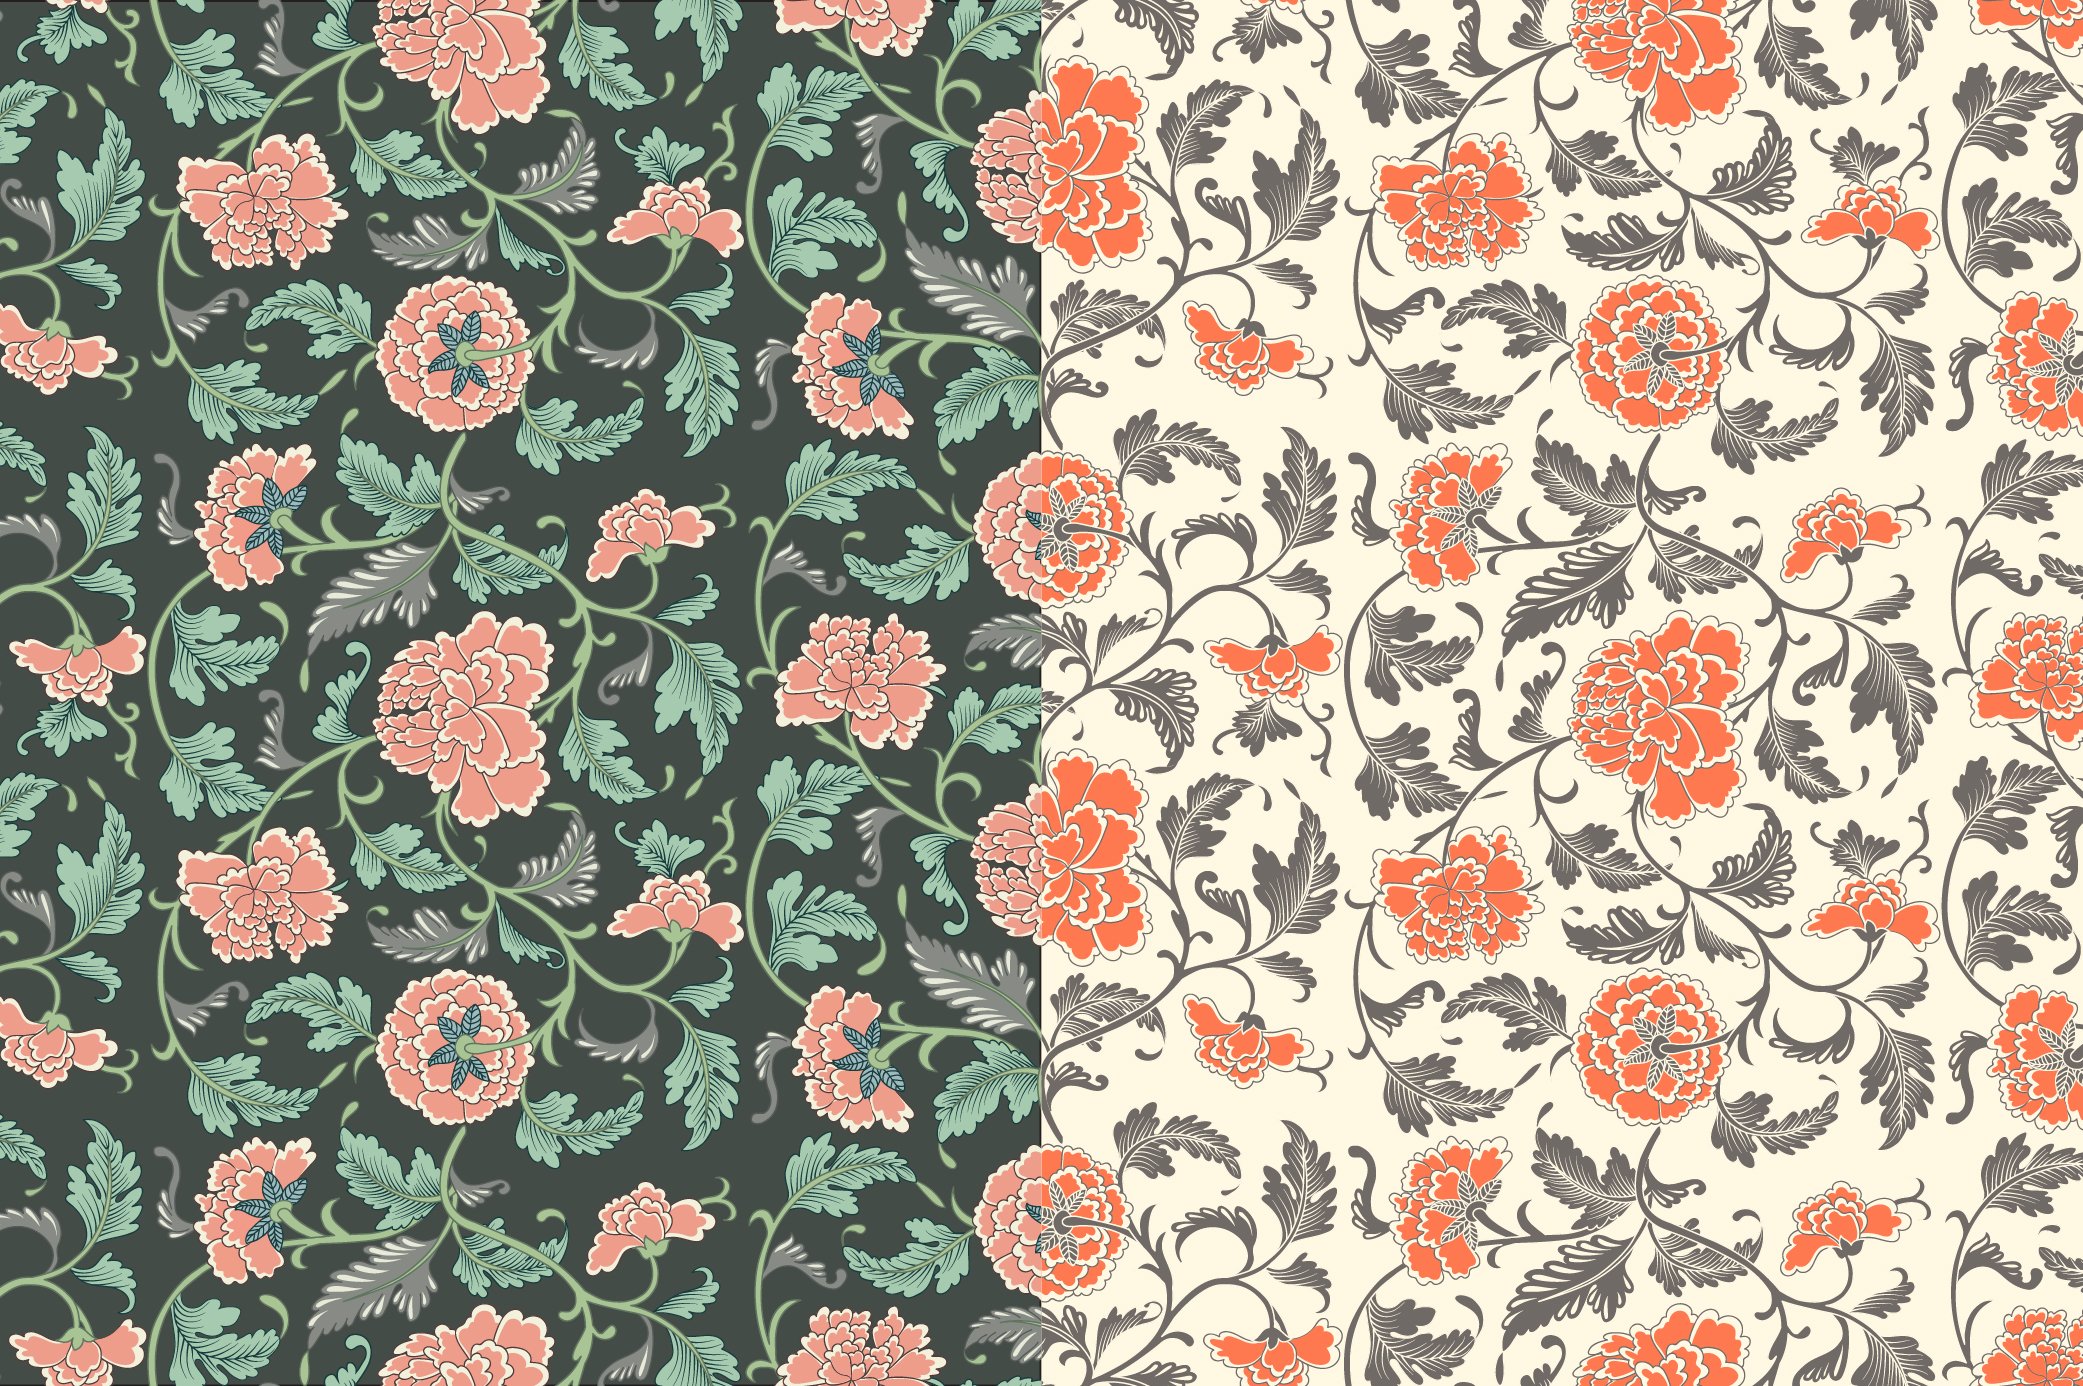 Two different patterns of flowers and leaves.